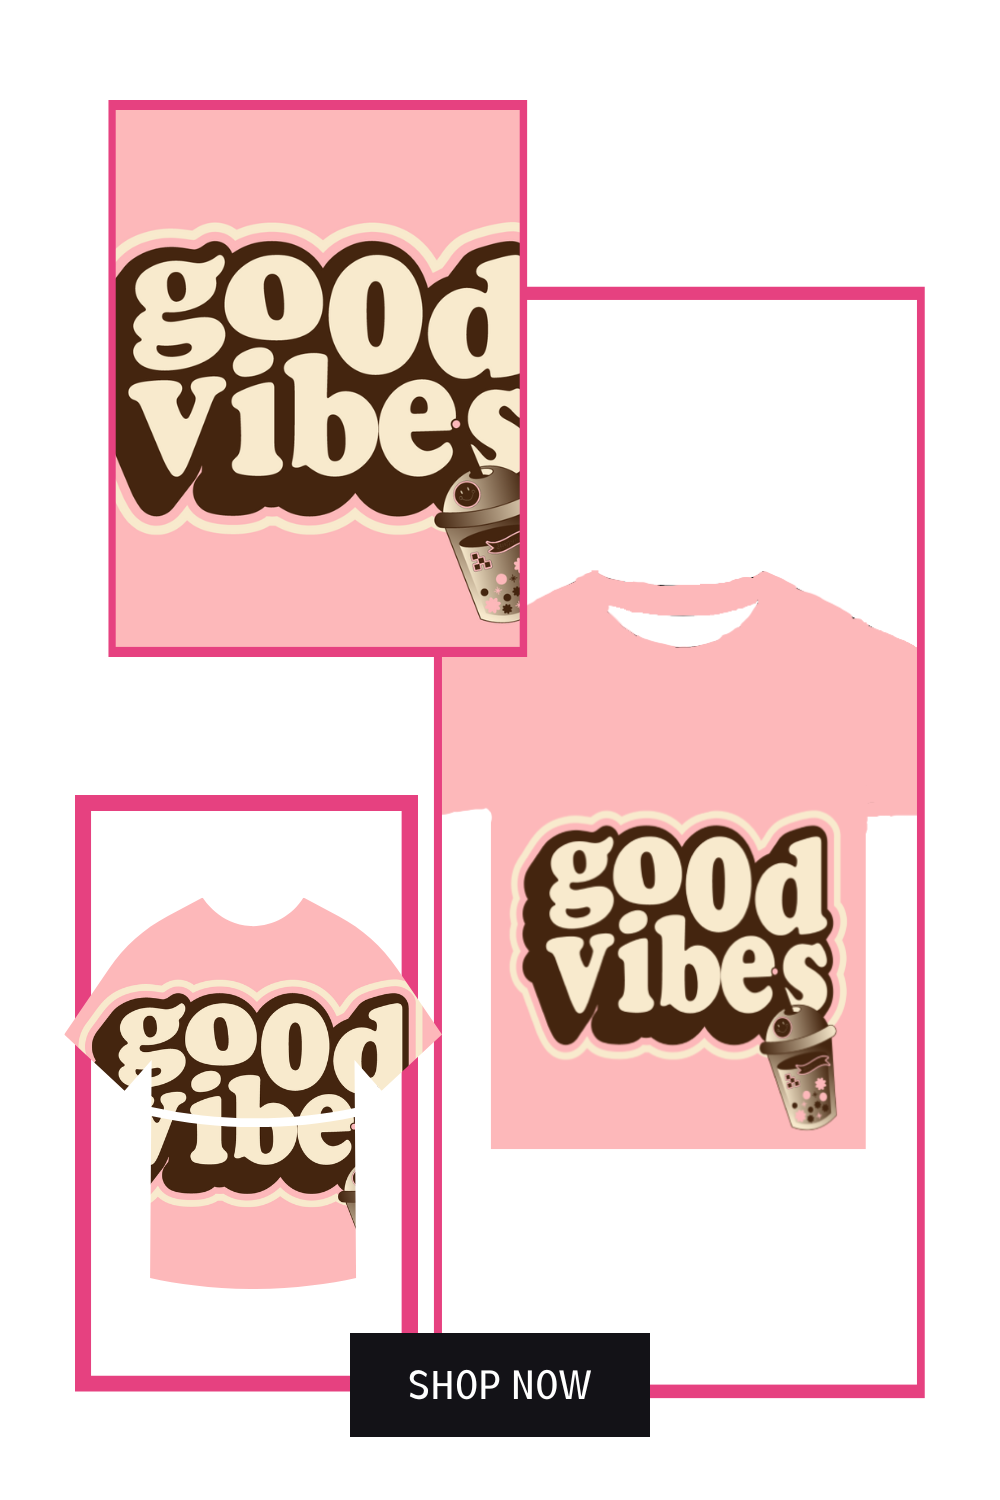 A good vibes T-shirt pinterest preview image.